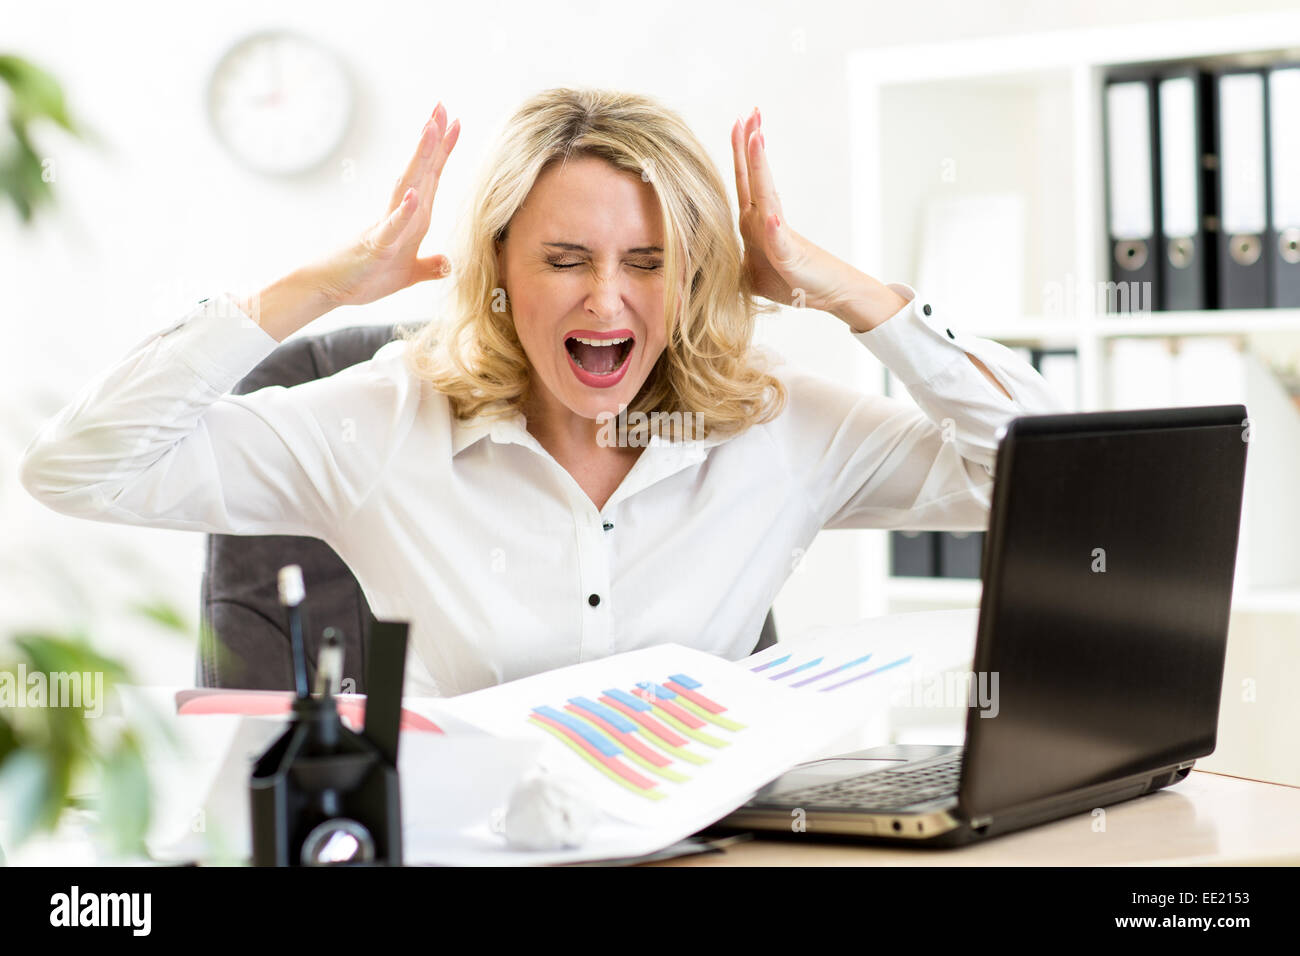 Stressed business femme criant bruyamment working in office Banque D'Images